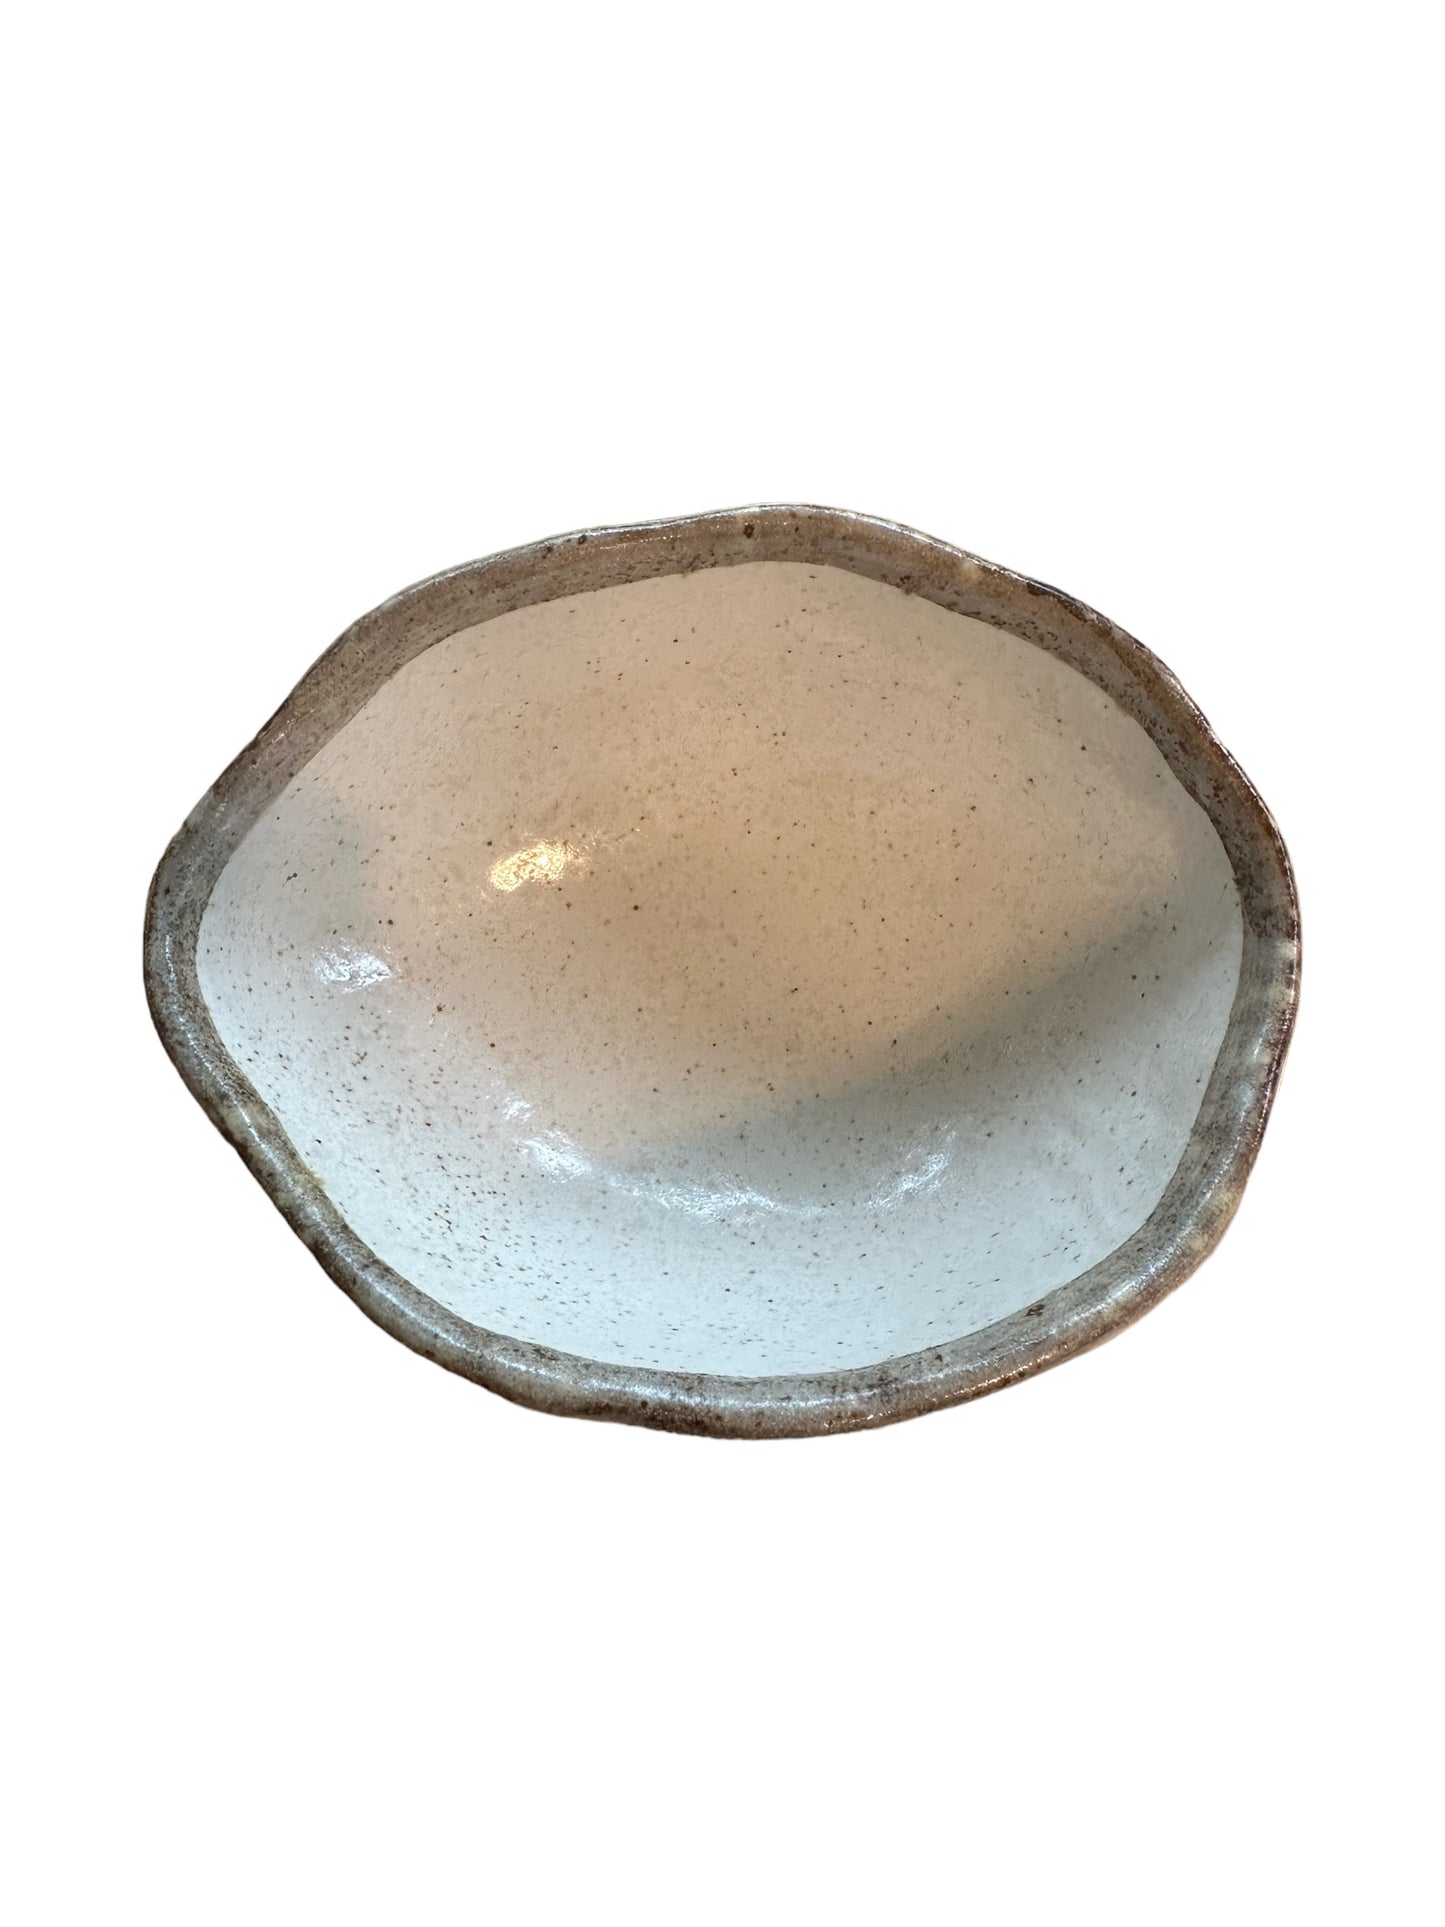 White base with grayish rim Japanese ceramic bowl, Natural, rustic and earthy glazes. 6" x 4.5" x 2.25"h